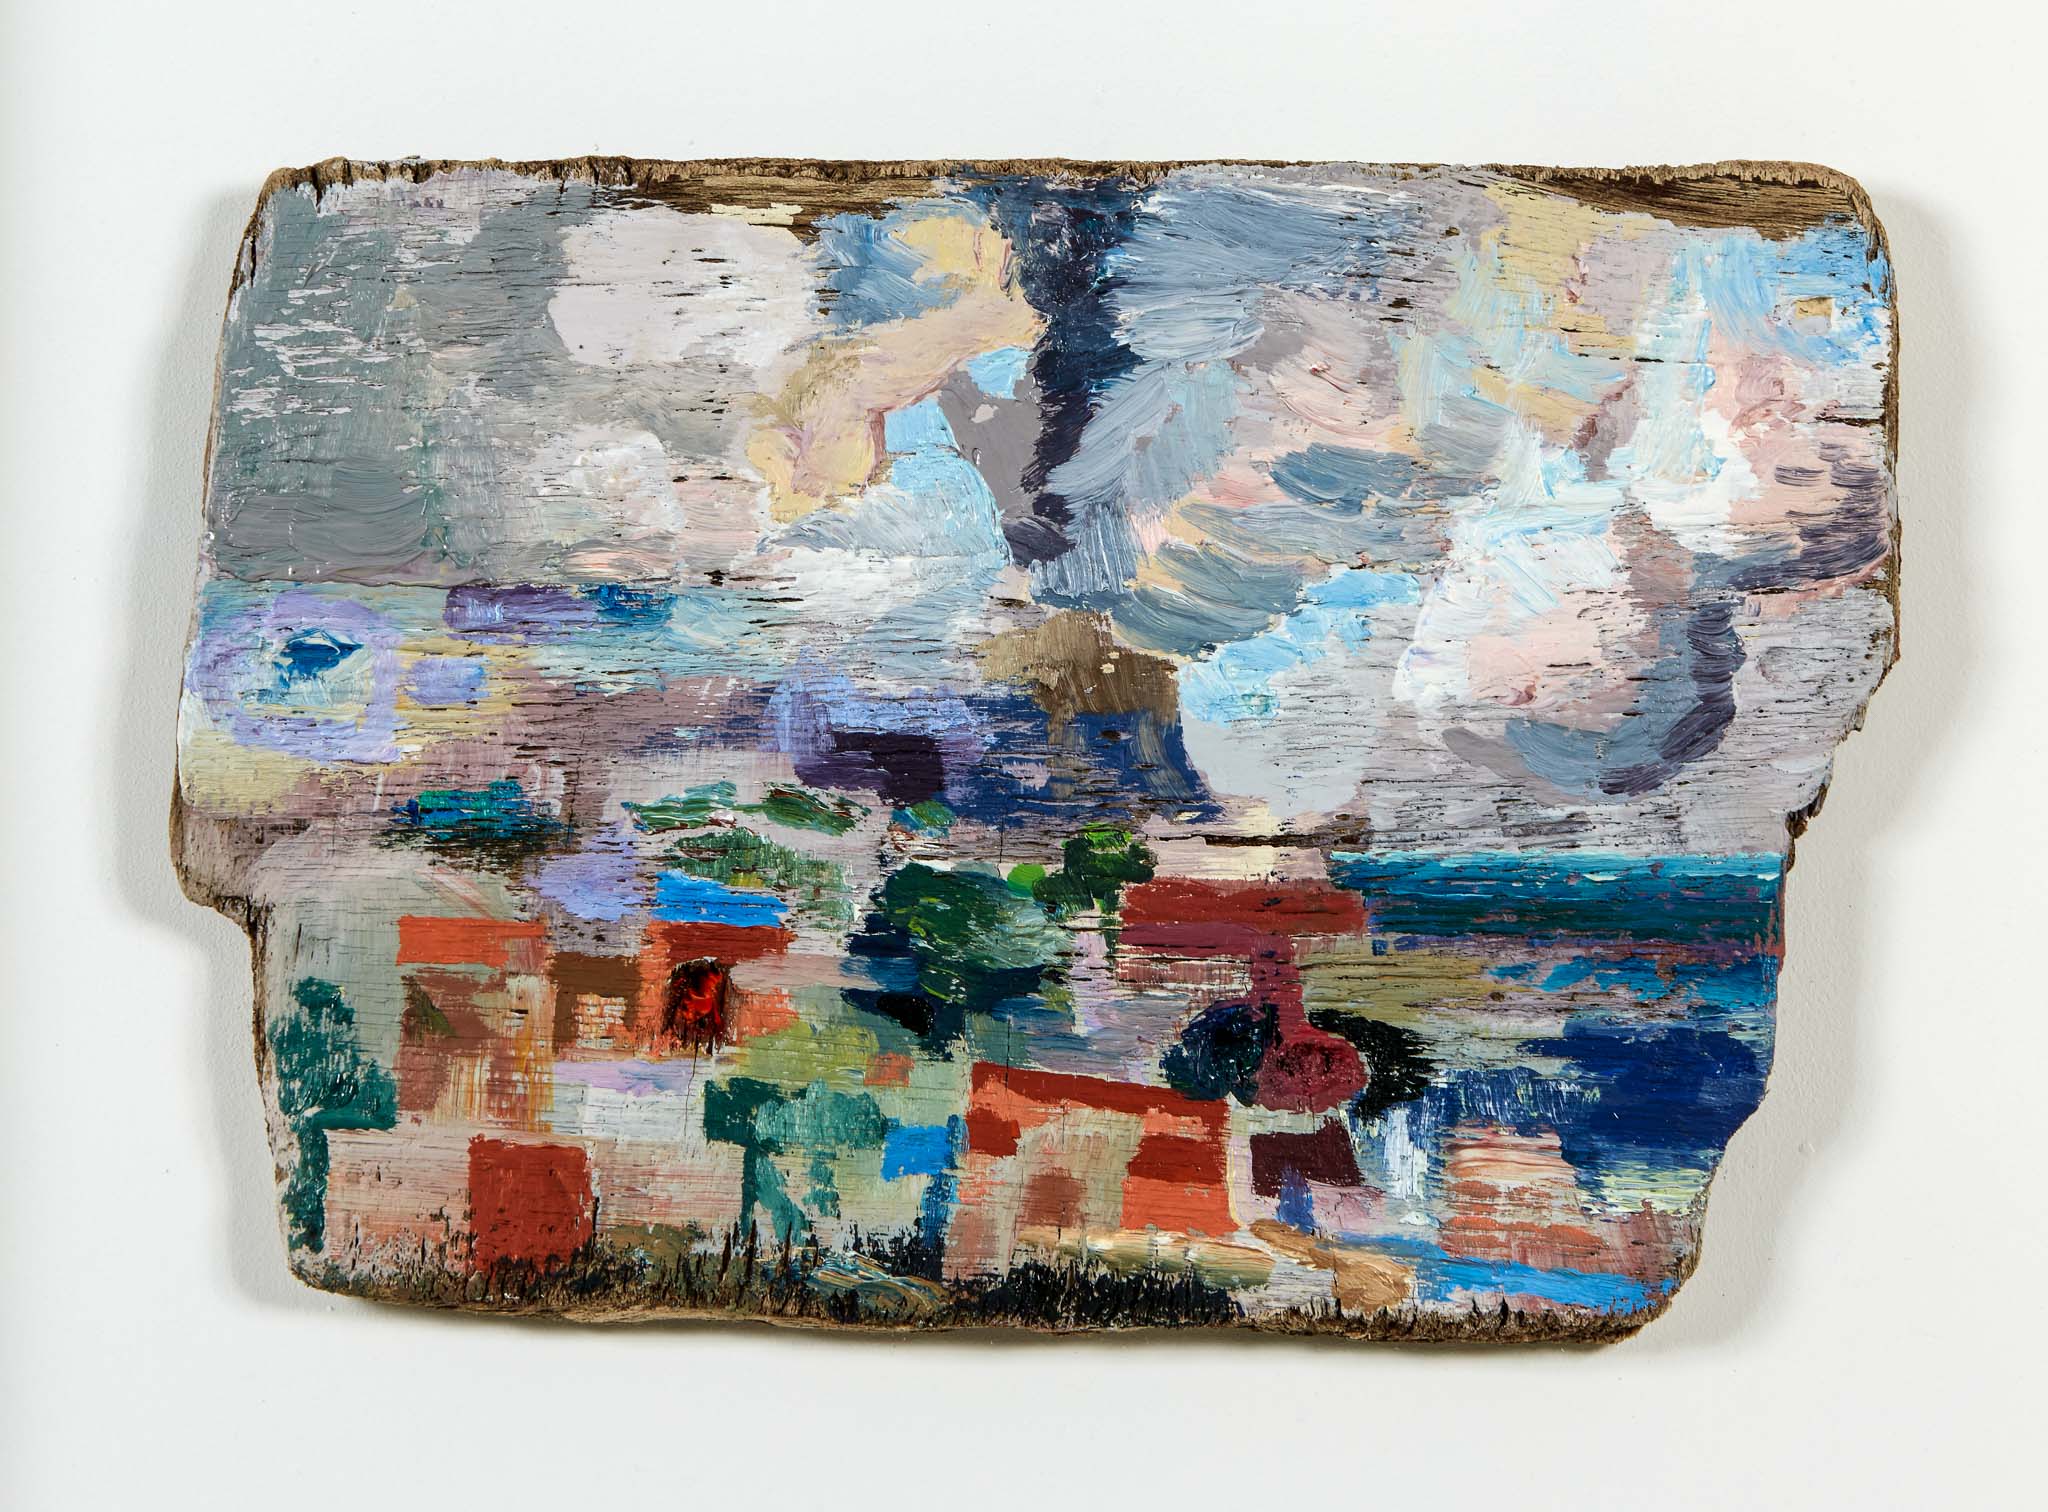 Painting on st Ives driftwood